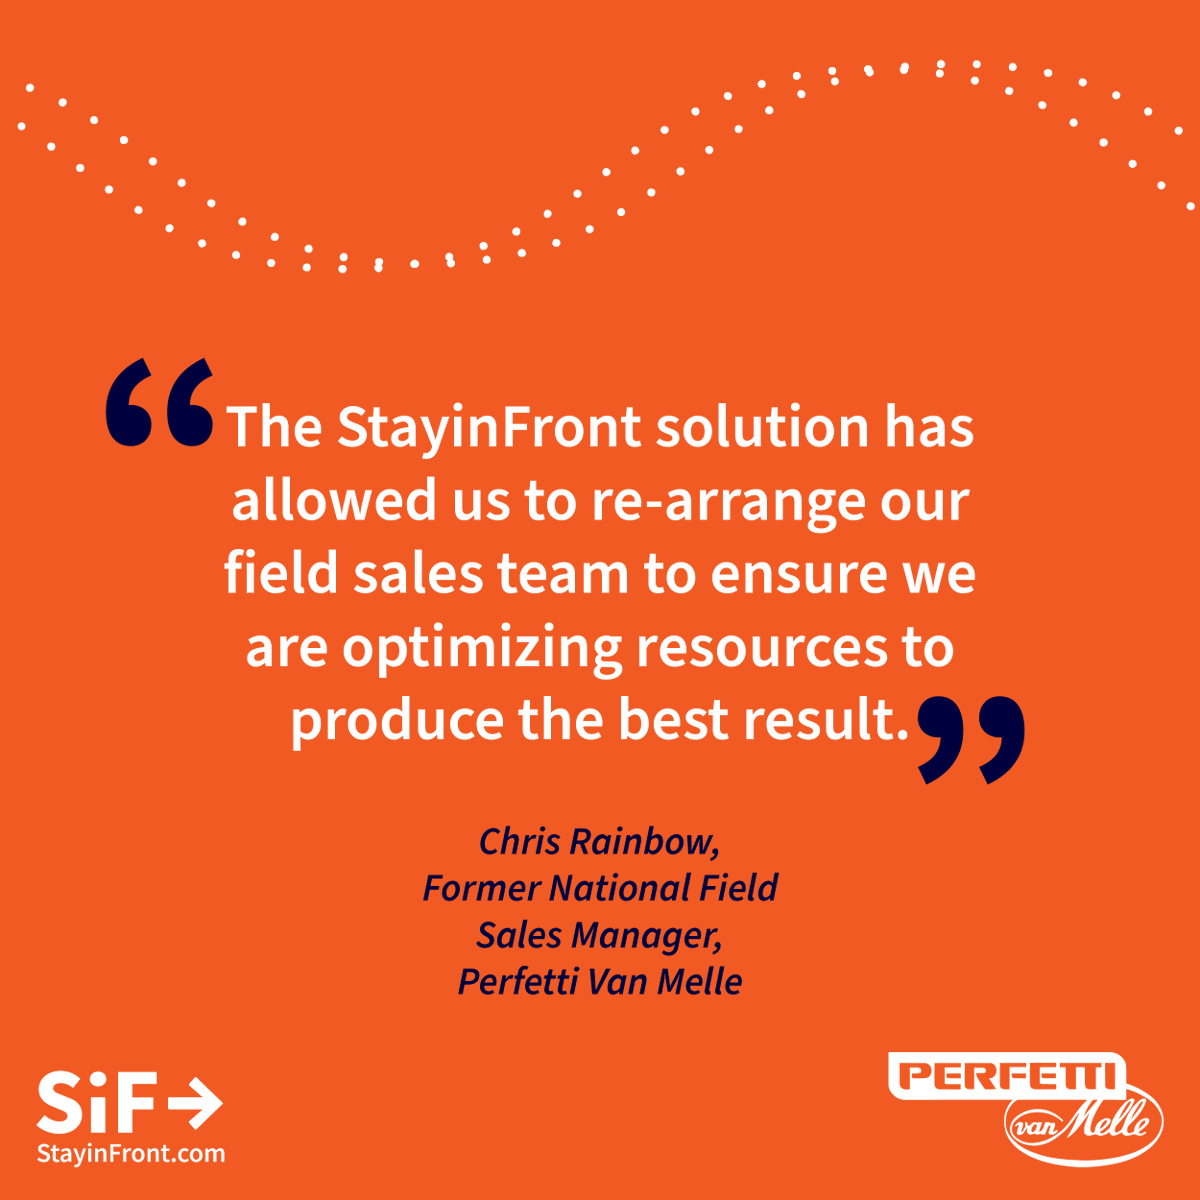 Improve your ROI with StayinFront’s Retail Optimization Platform! Contact our sales team today at sales@stayinfront.com to find out more.

#CustomerSuccess #RetailOptimization #RetailExecution #ROI